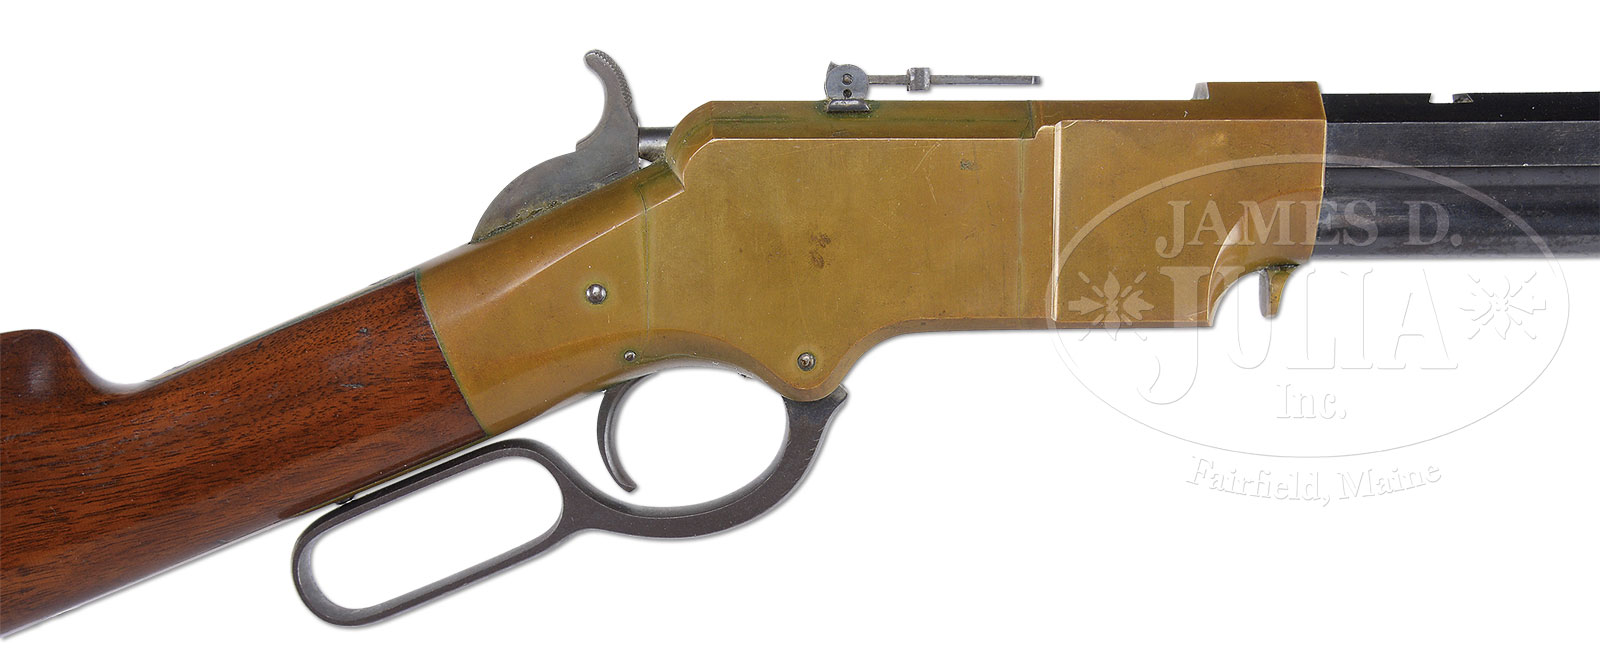 FANTASTIC AND ULTRA RARE “NO LATCH” HENRY RIFLE IN UNTOUCHED CONDITION.